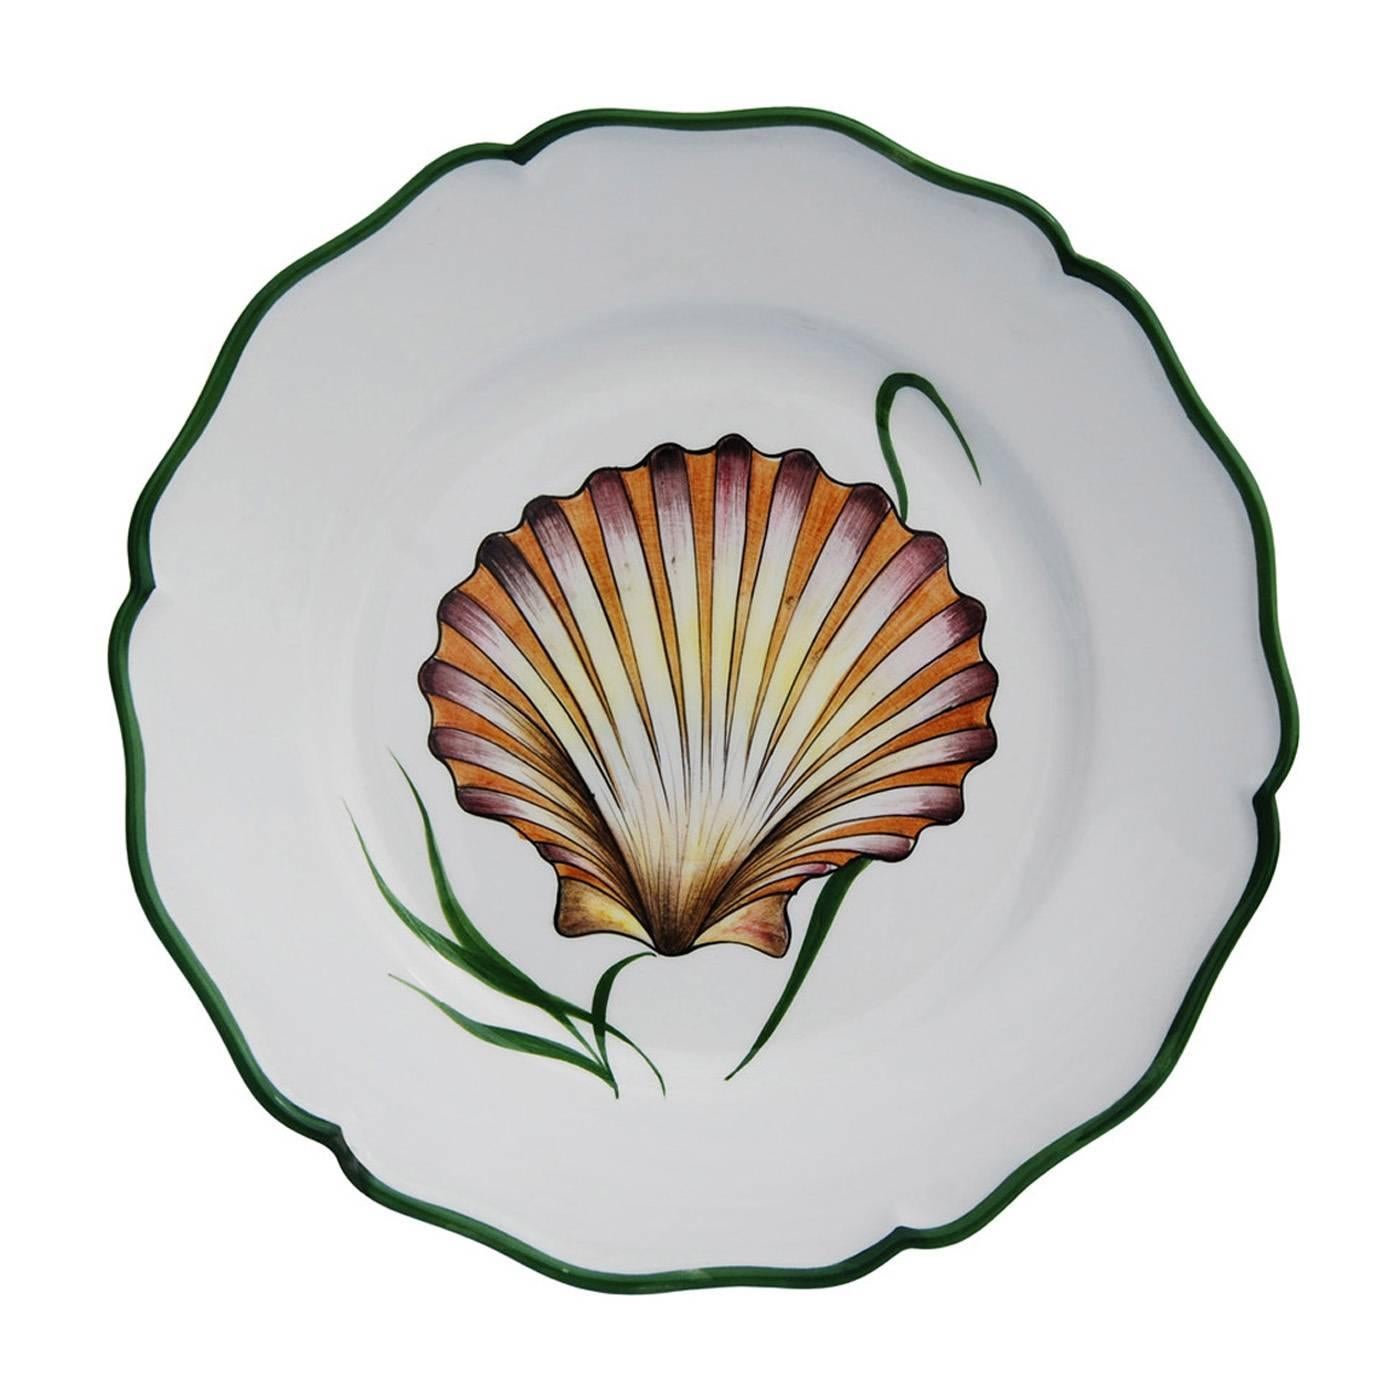 Decorative shell motifs on an elegant white background are set against a dark green rim in this set of four ceramic plates entirely handcrafted and hand-painted by expert artisans in the Northern-Italy town of Este. This set matches other sea-life